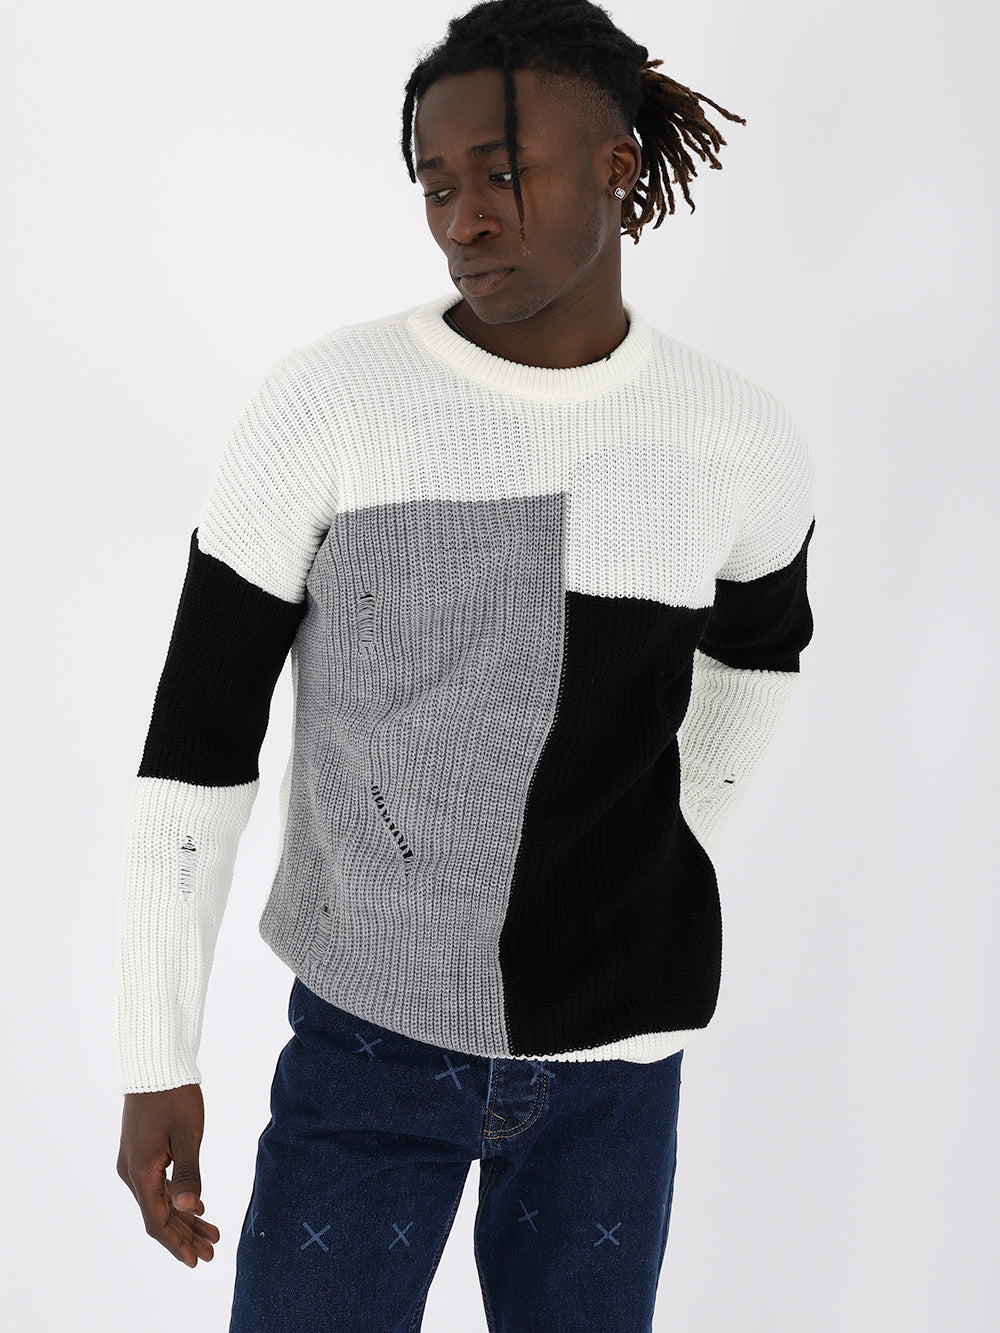 A man wearing a DISTRESSED GENTLEMAN SWEATER | MULTICOLOR sweater.